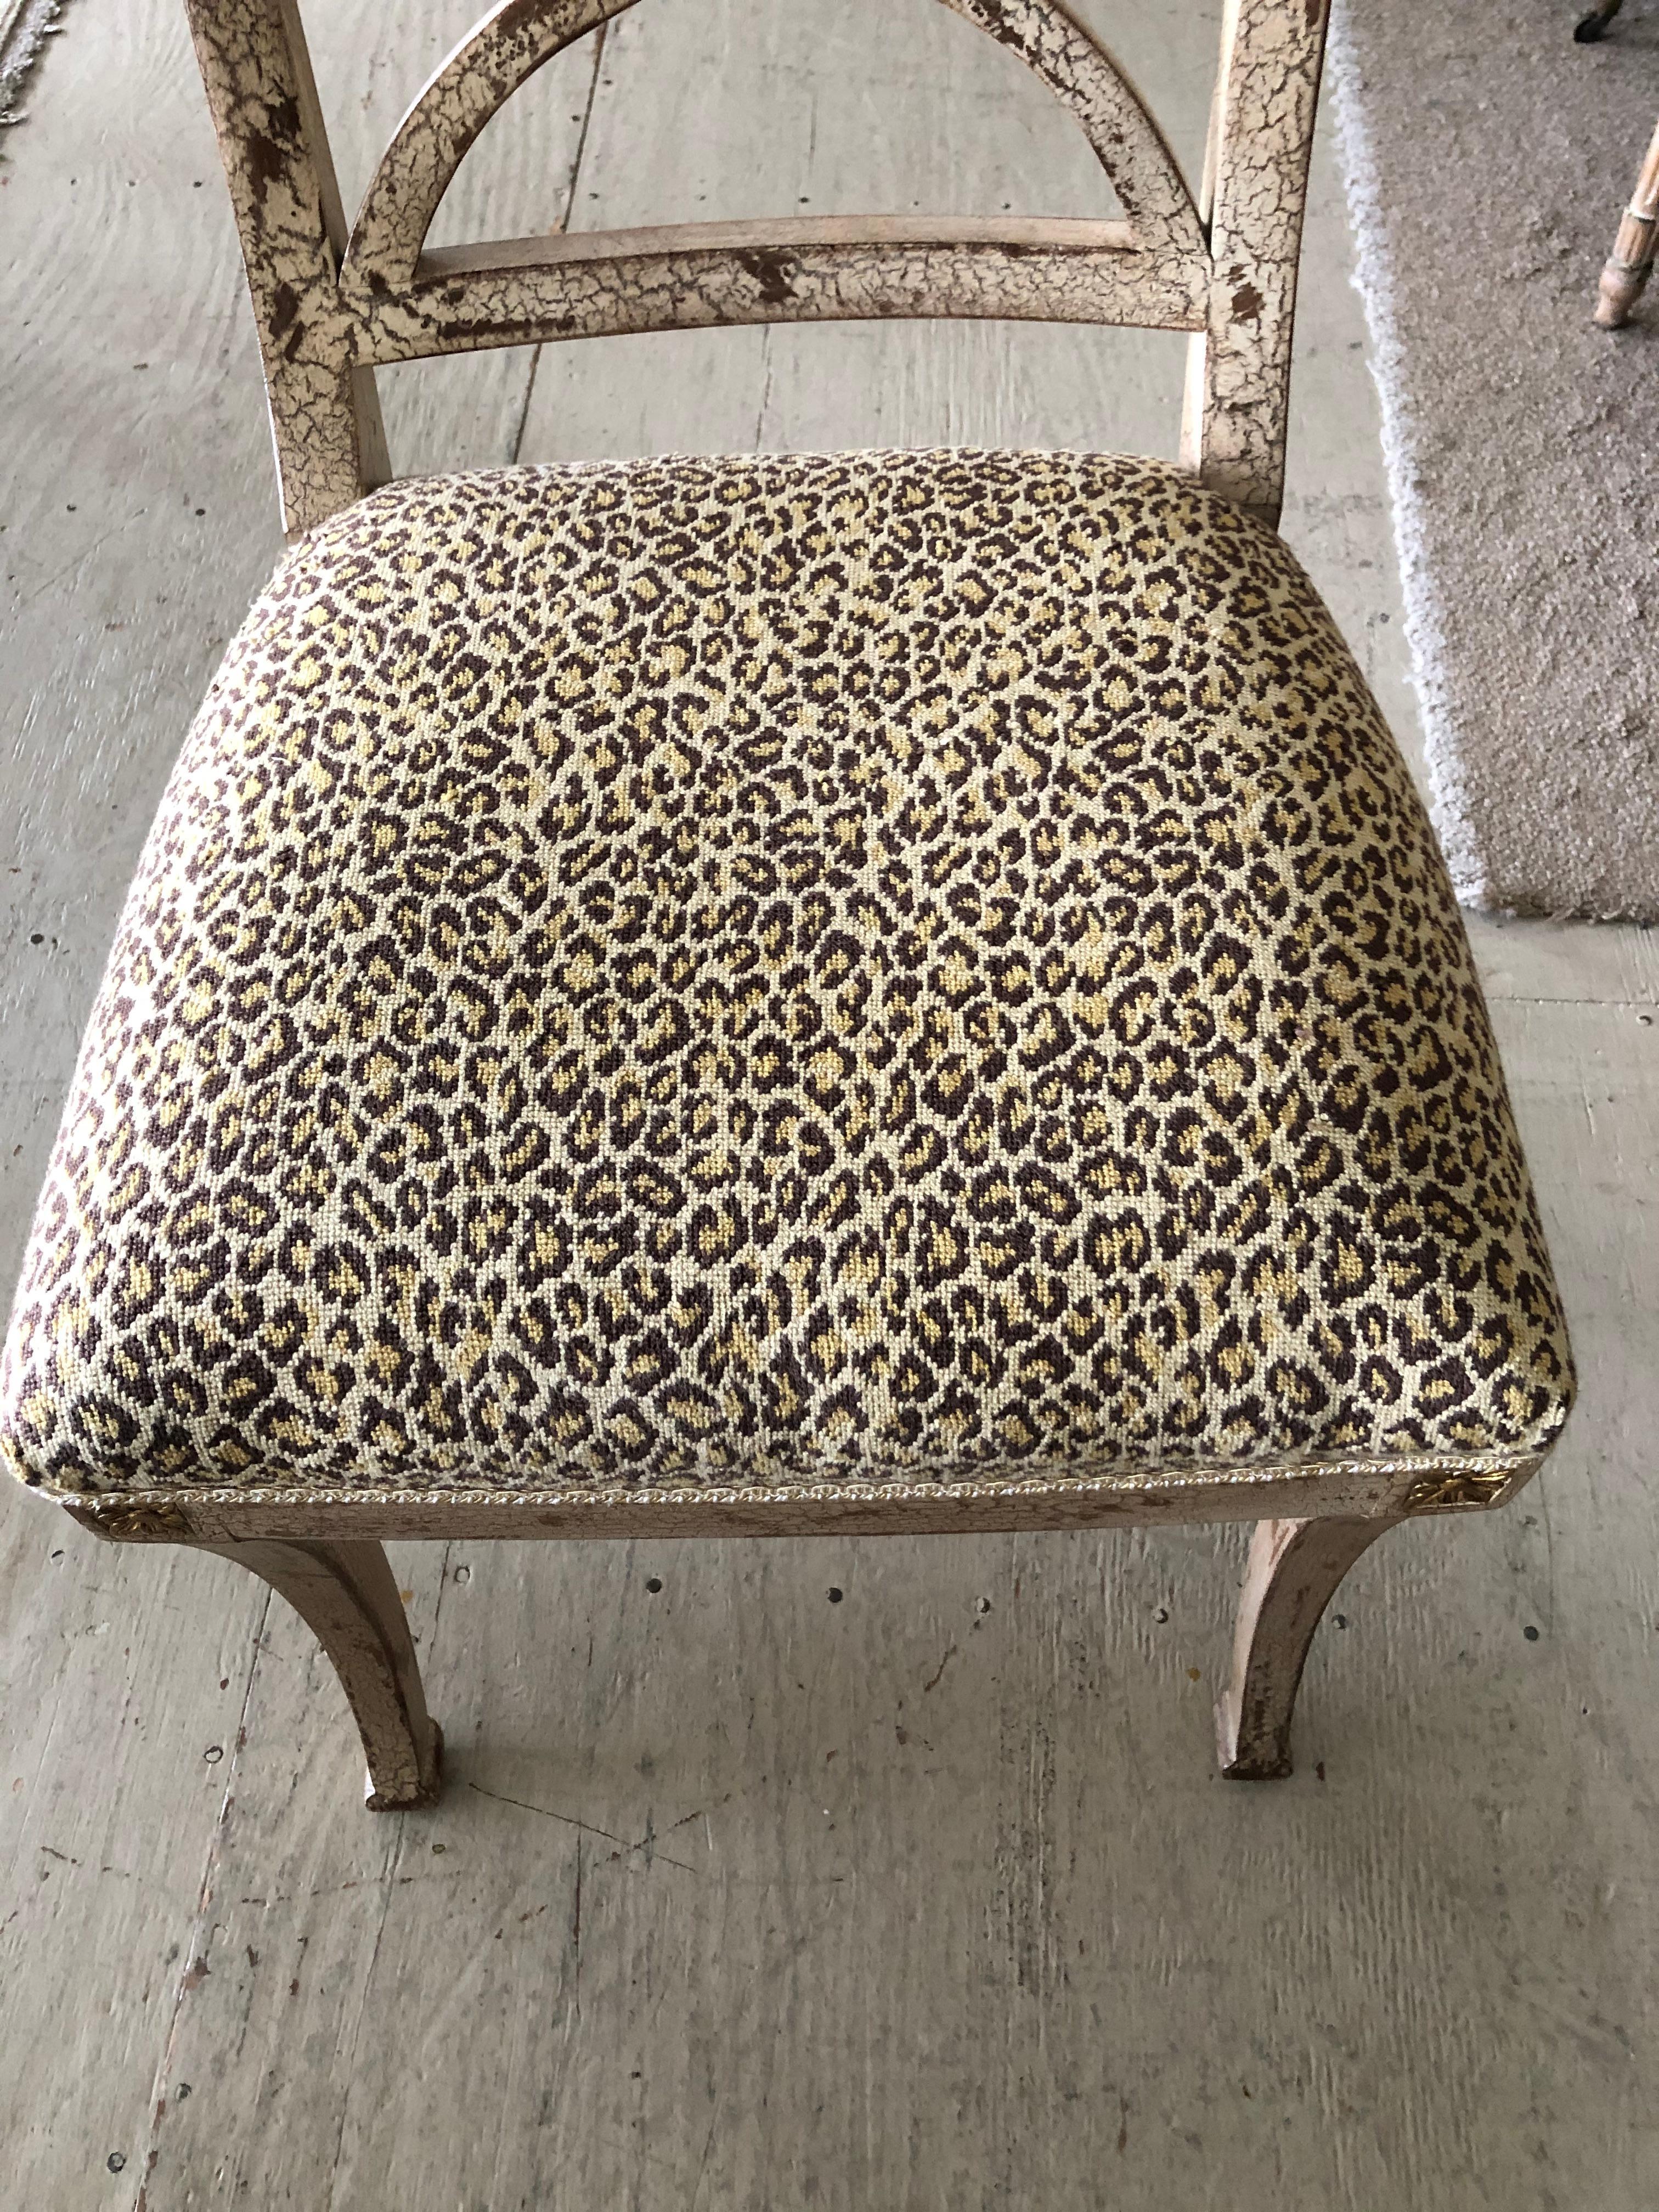 American Stylish Painted Distressed Desk Chair with Faux Leopard Upholstery